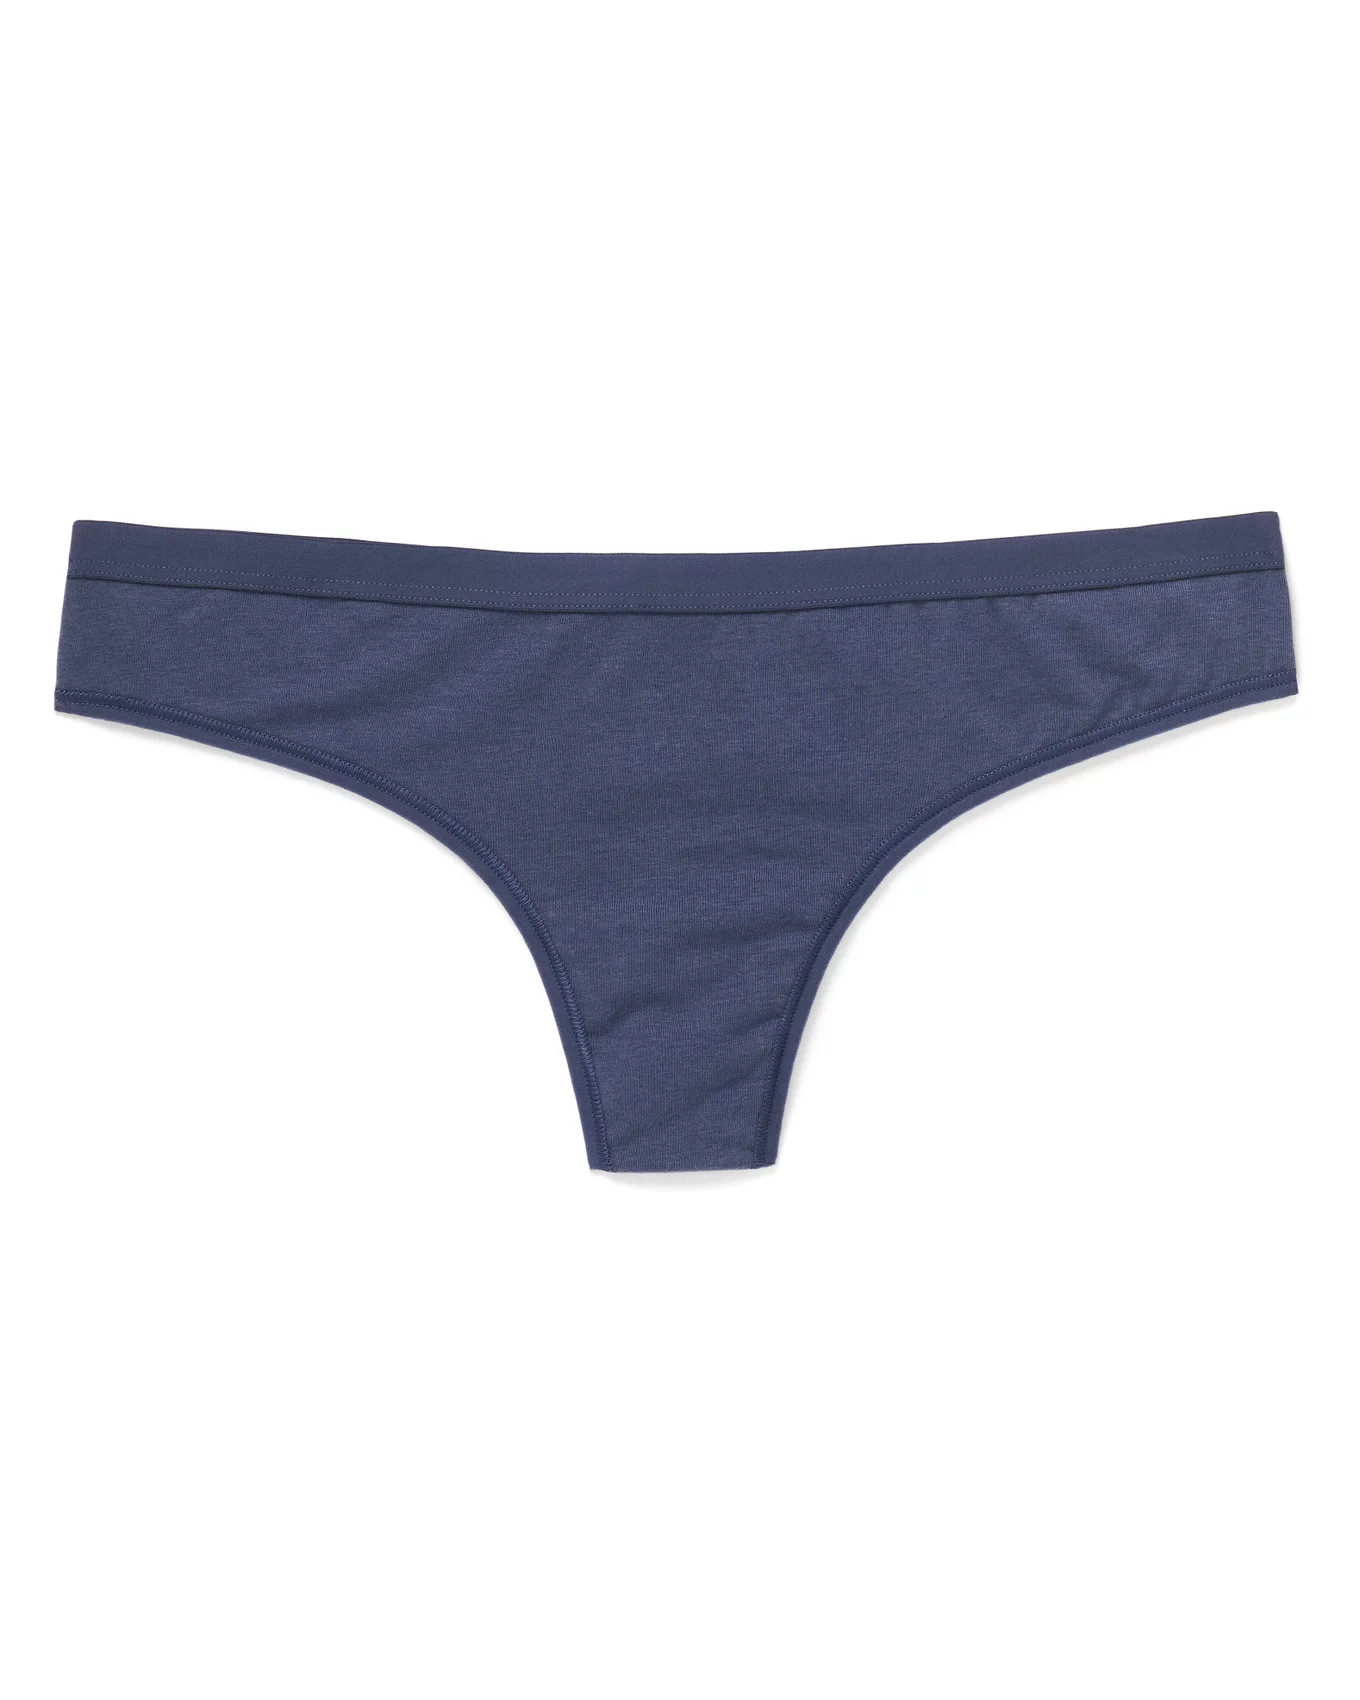 3-pack invisible thong briefs - Navy blue/White/Light blue